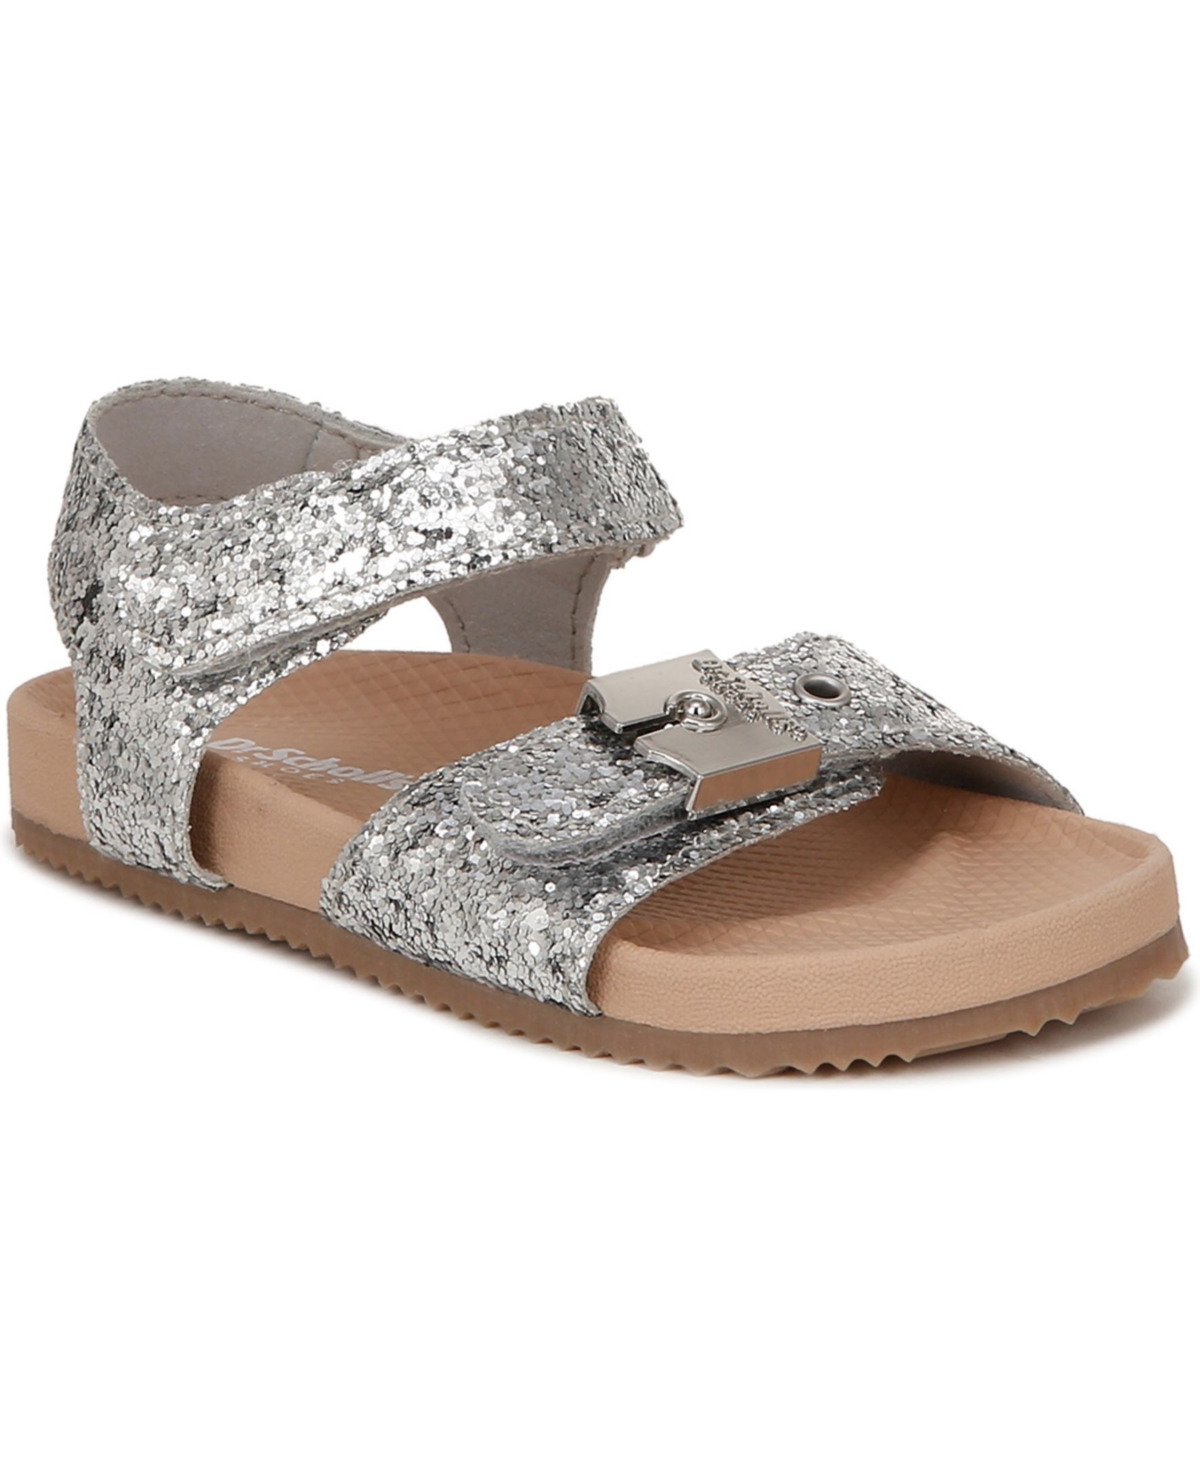 Dr. Scholl's Kids' Original Toddler Ankle Straps In Silver Gray